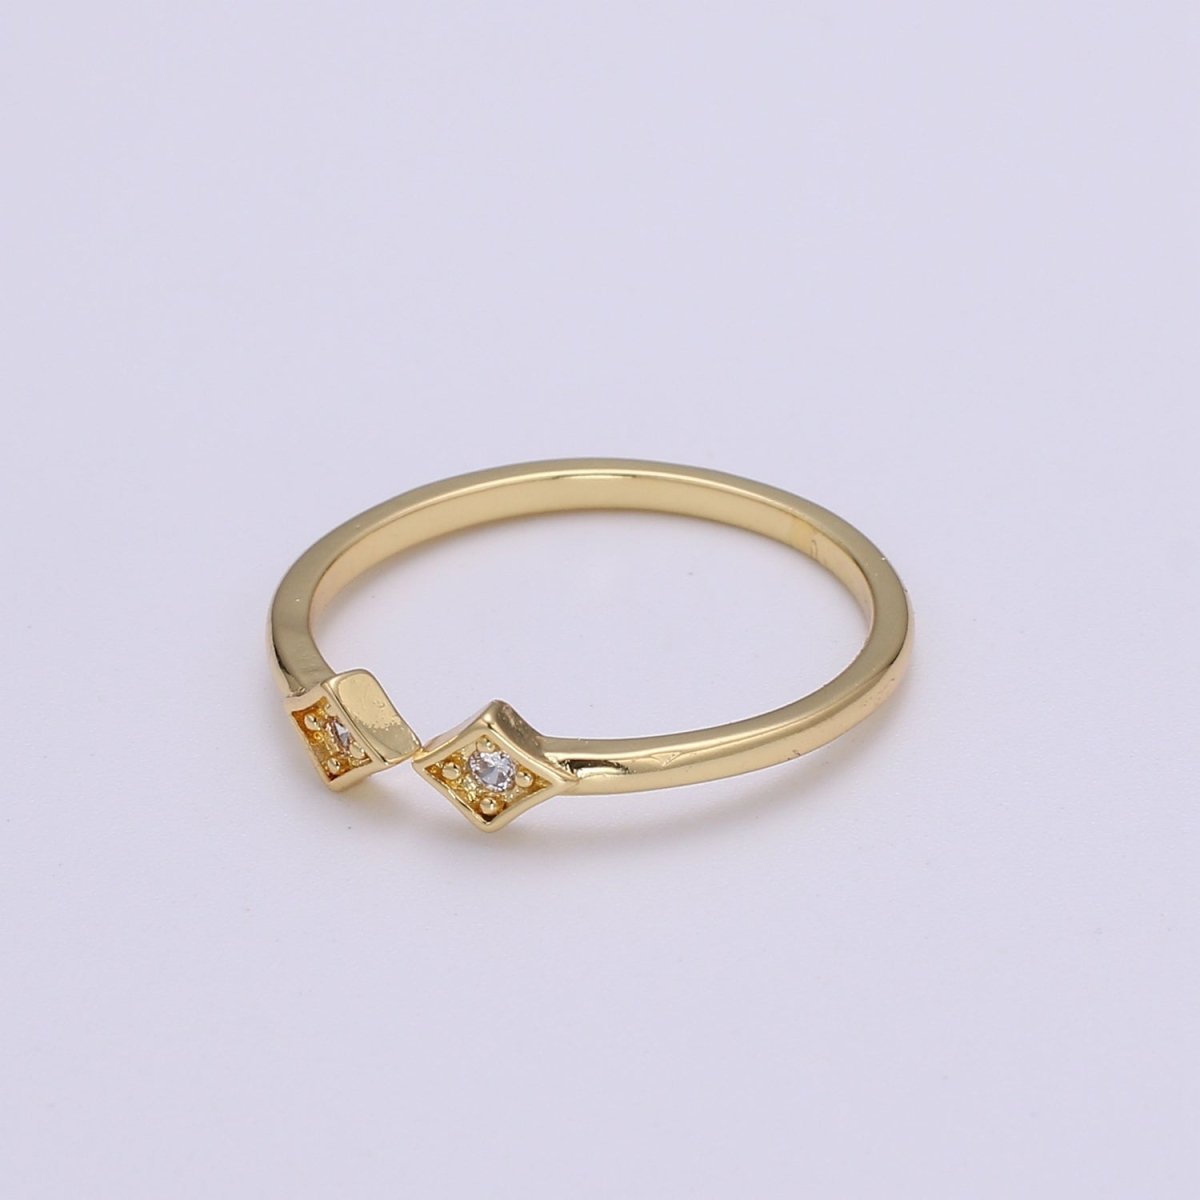 Tiny Ring, Minimalist Ring, Stackable Ring, Thin Ring, Dainty Ring, Trendy Ring, Rhombus Ring, Gold Ring Geometric Jewelry Gift idea O-288 - DLUXCA